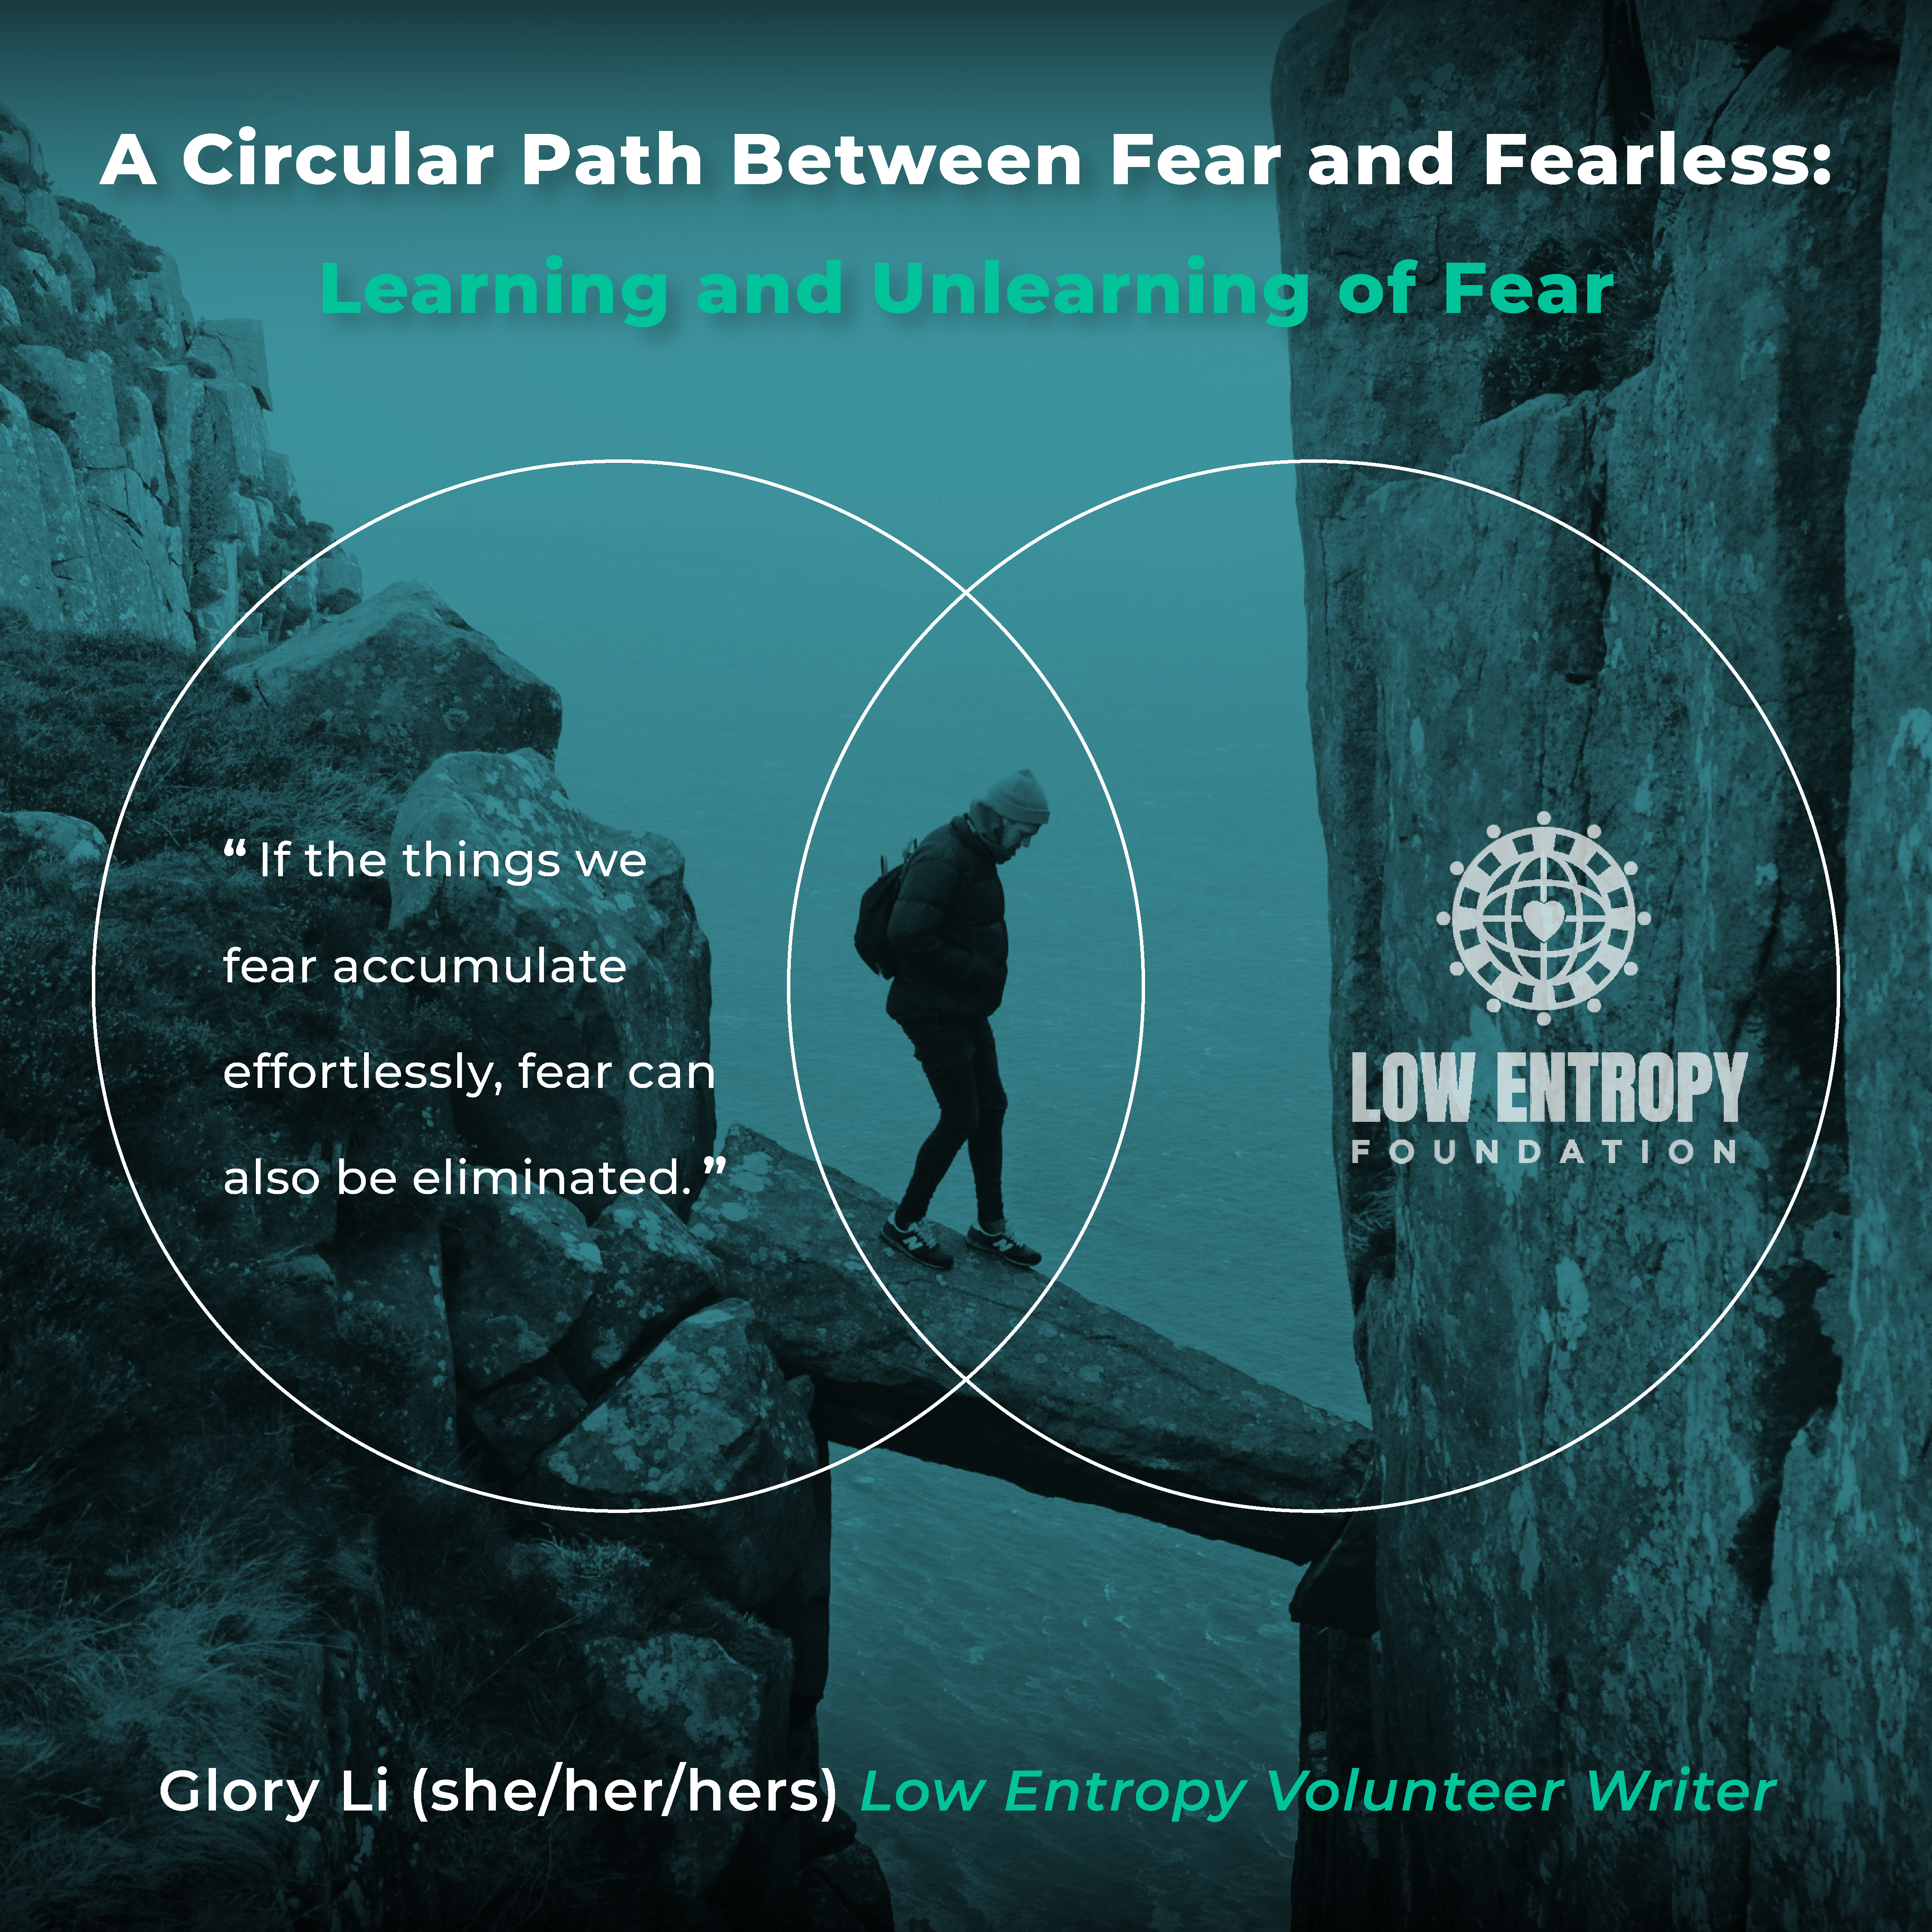 A Circular Path Between Fear and Fearless: Learning and Unlearning of Fear